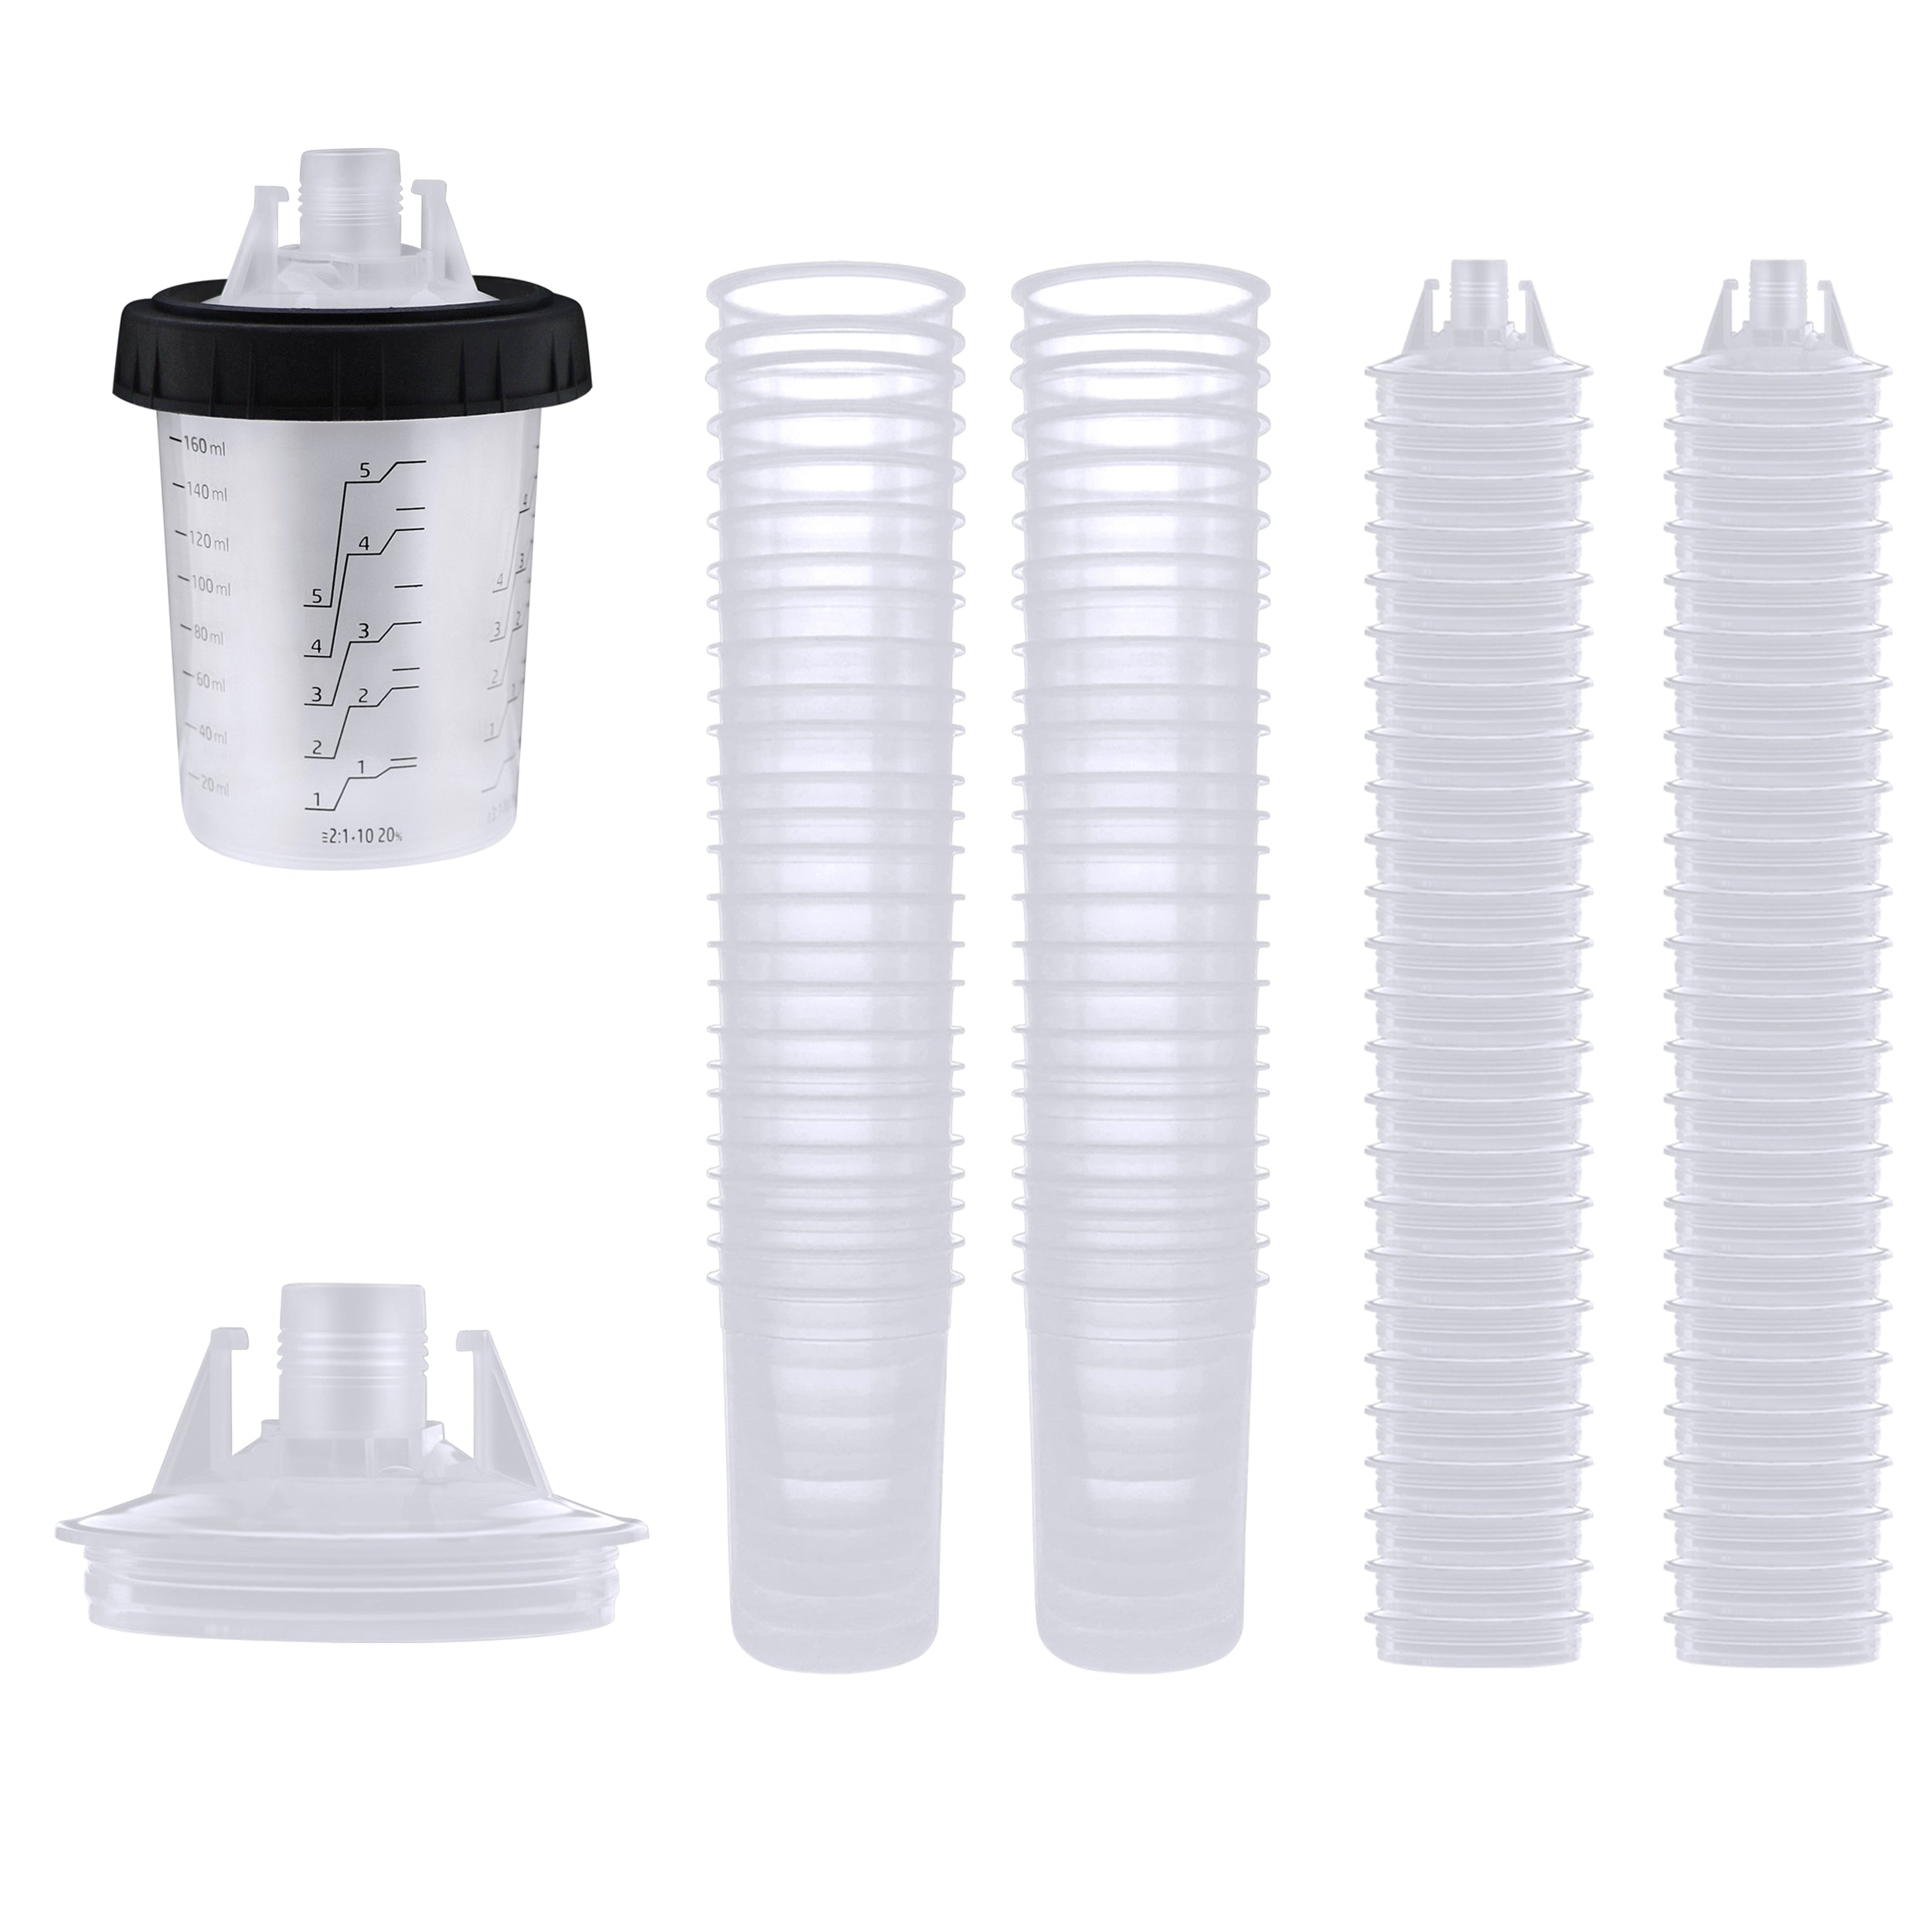 50pk 6oz Automotive Paint Mixing Cup Kit with Filter Lids and Liners